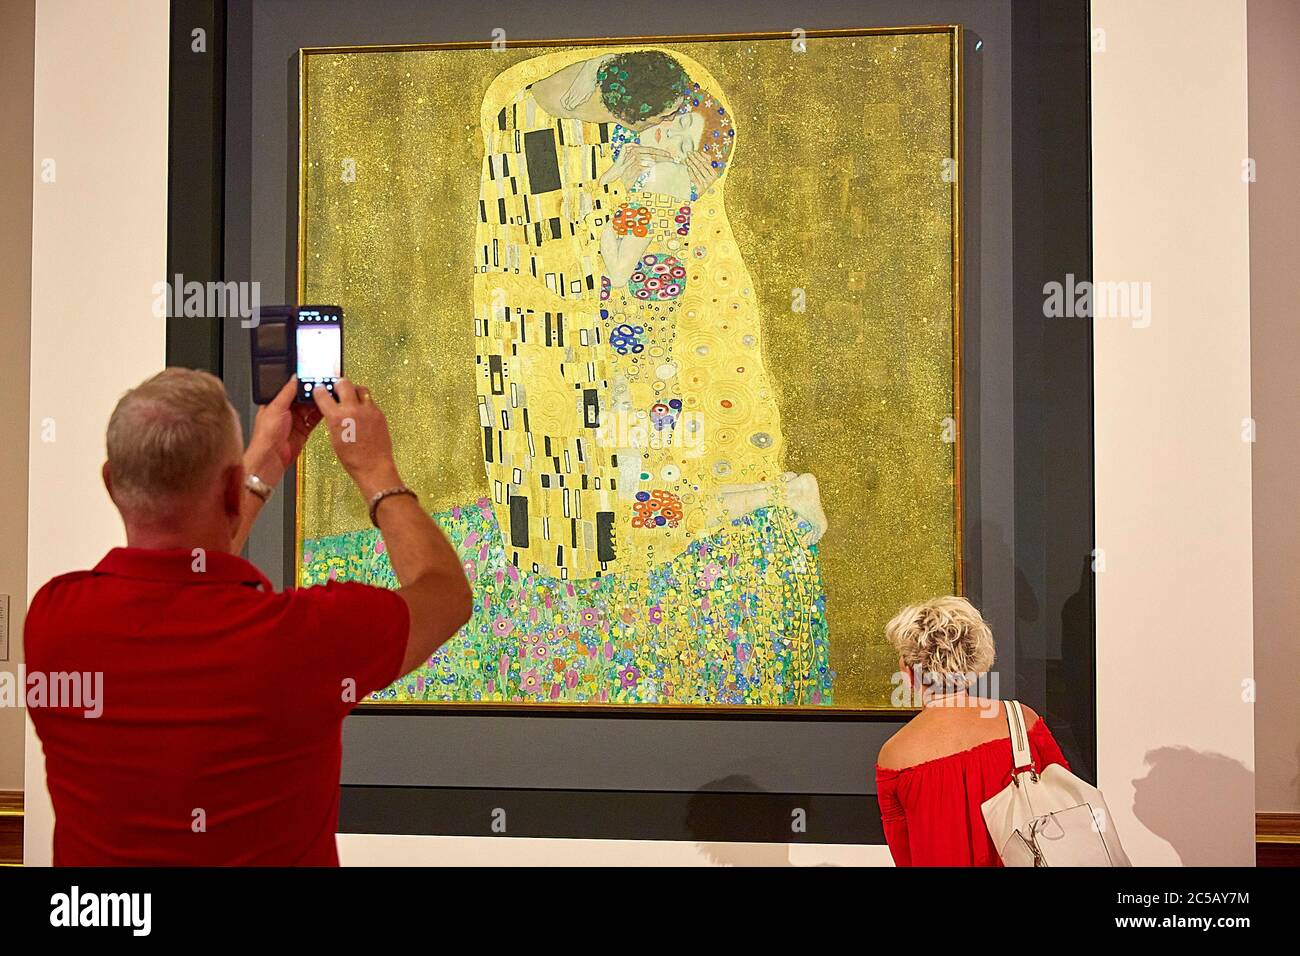 Vienna, Austria. 1st July, 2020. People view The Kiss (Lovers) by Gustav Klimt at the Upper Belvedere in Vienna, Austria, on July 1, 2020. The Upper Belvedere reopened to visitors on Wednesday after a temporary closure due to the COVID-19 pandemic. Credit: Georges Schneider/Xinhua/Alamy Live News Stock Photo